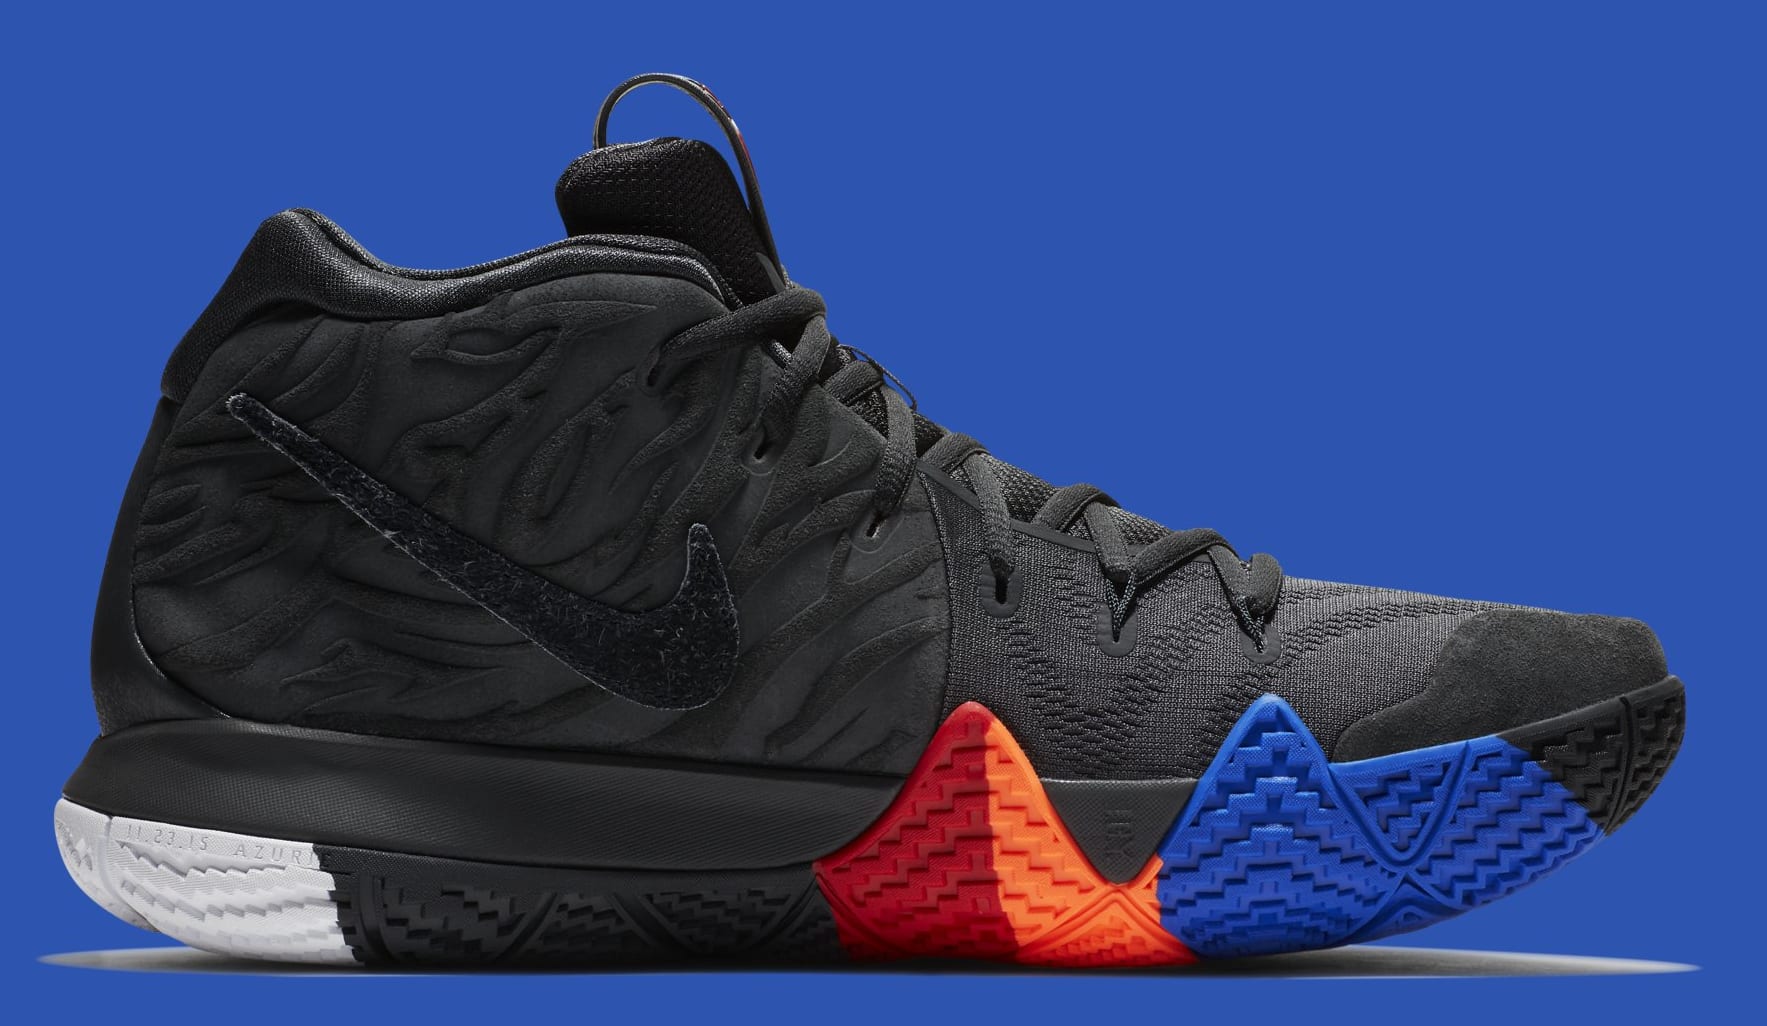 Nike Kyrie 4 &#x27;Year of the Monkey&#x27; 943807-011 (Medial)